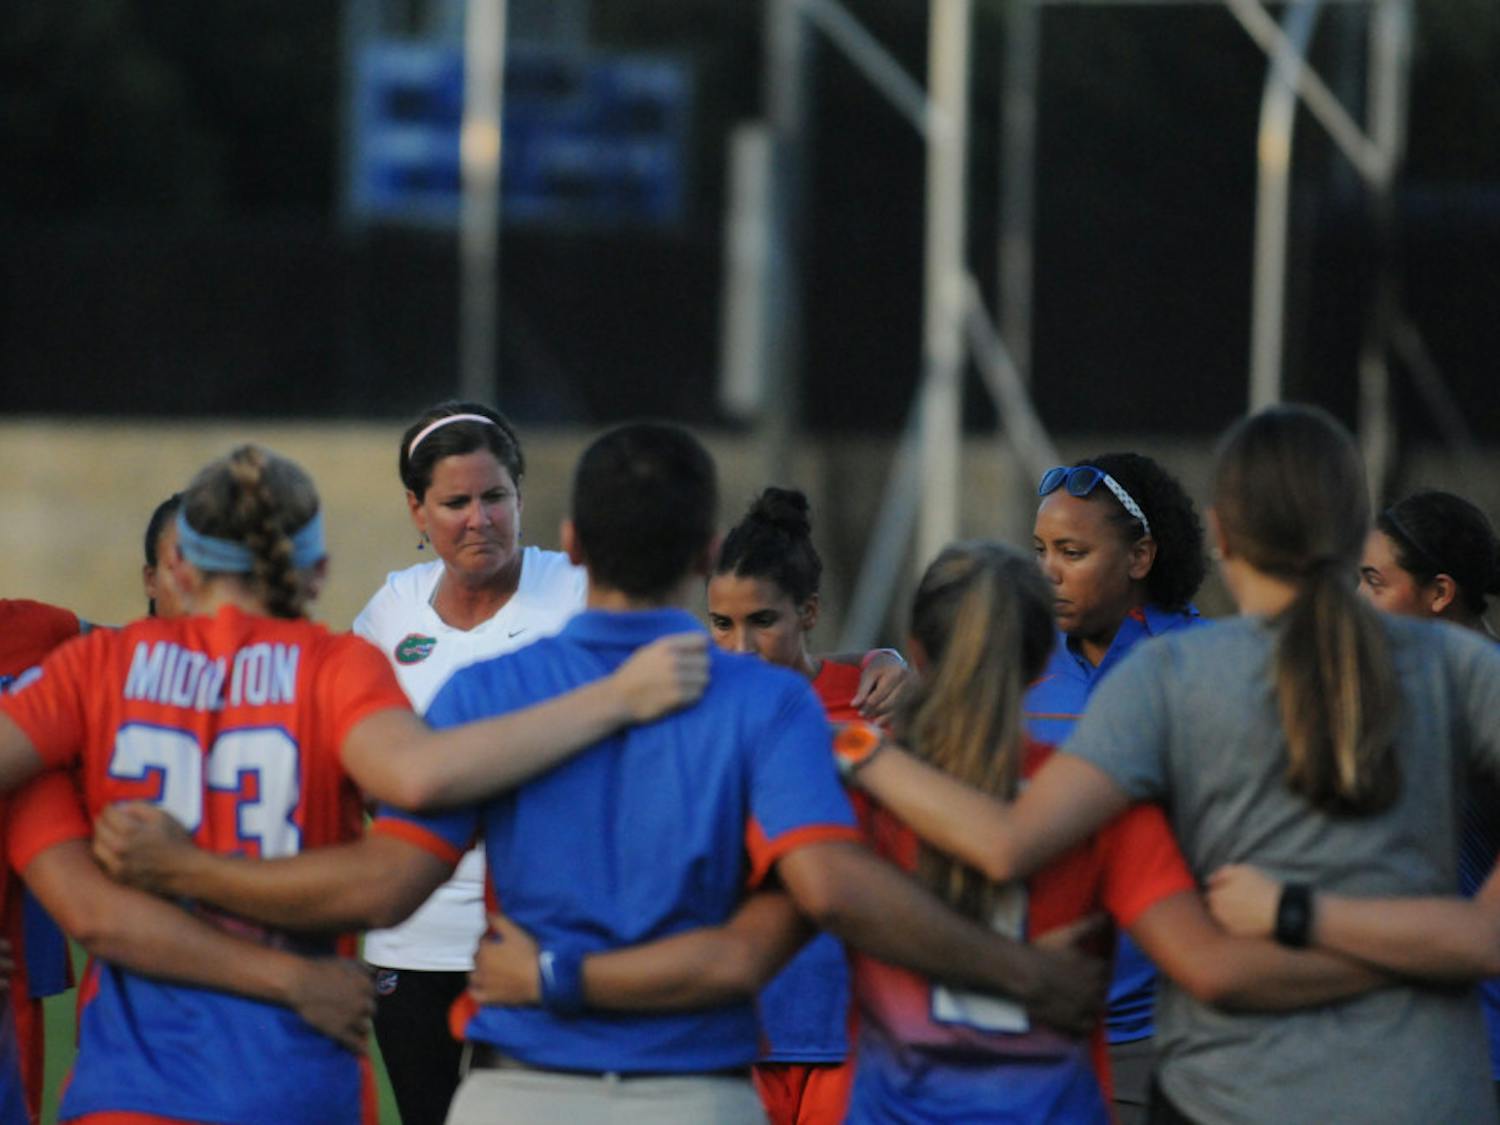 UF coach Becky Burleigh knows her team is in for a challenging season with one of the hardest schedules in the nation. 